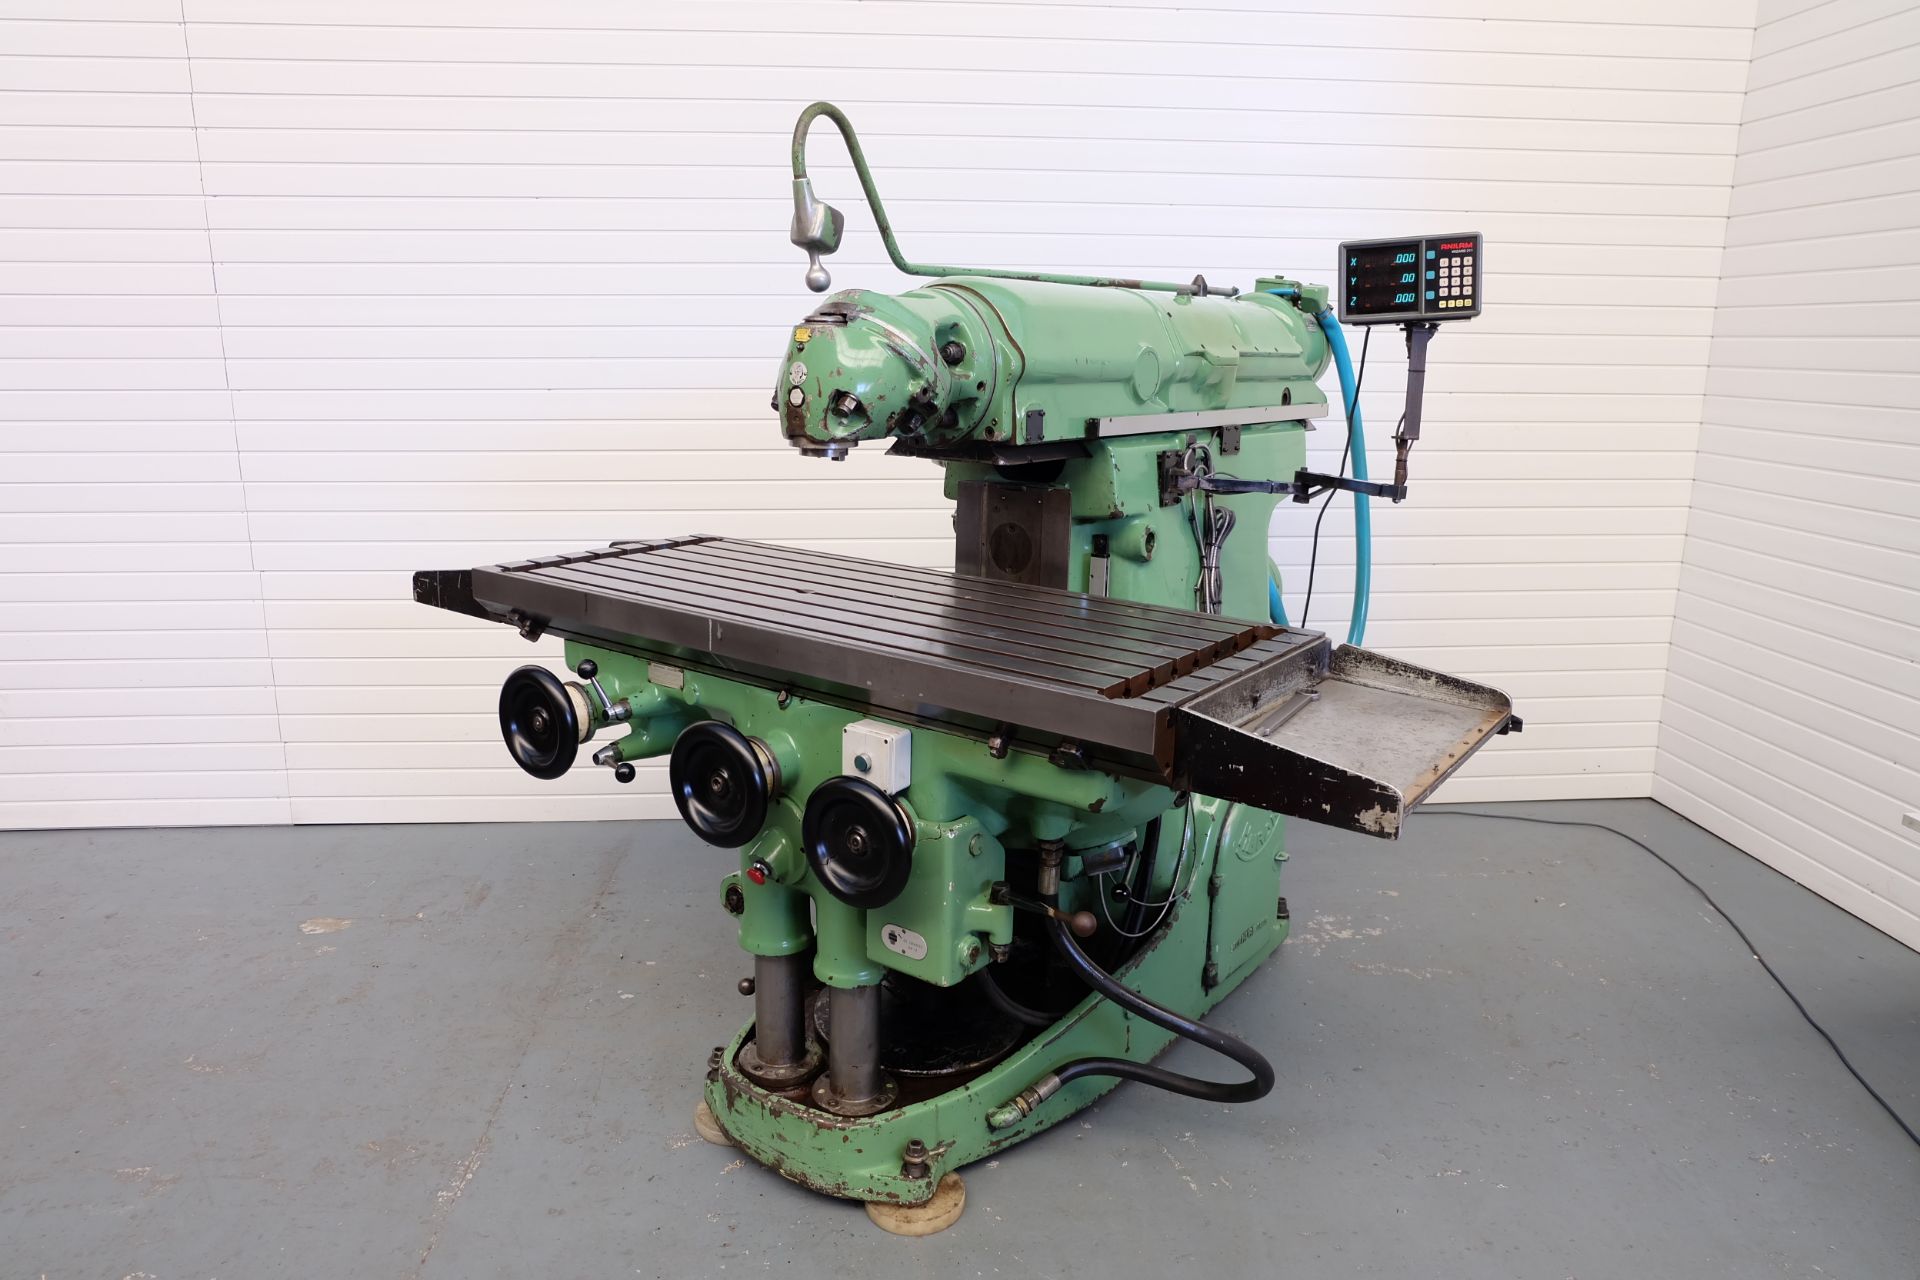 Huron KU55 Universal Mill. Table Size 64 3/8" x 26". Spindle Taper 40 ISO. Spindle Speeds 30 - 2066r